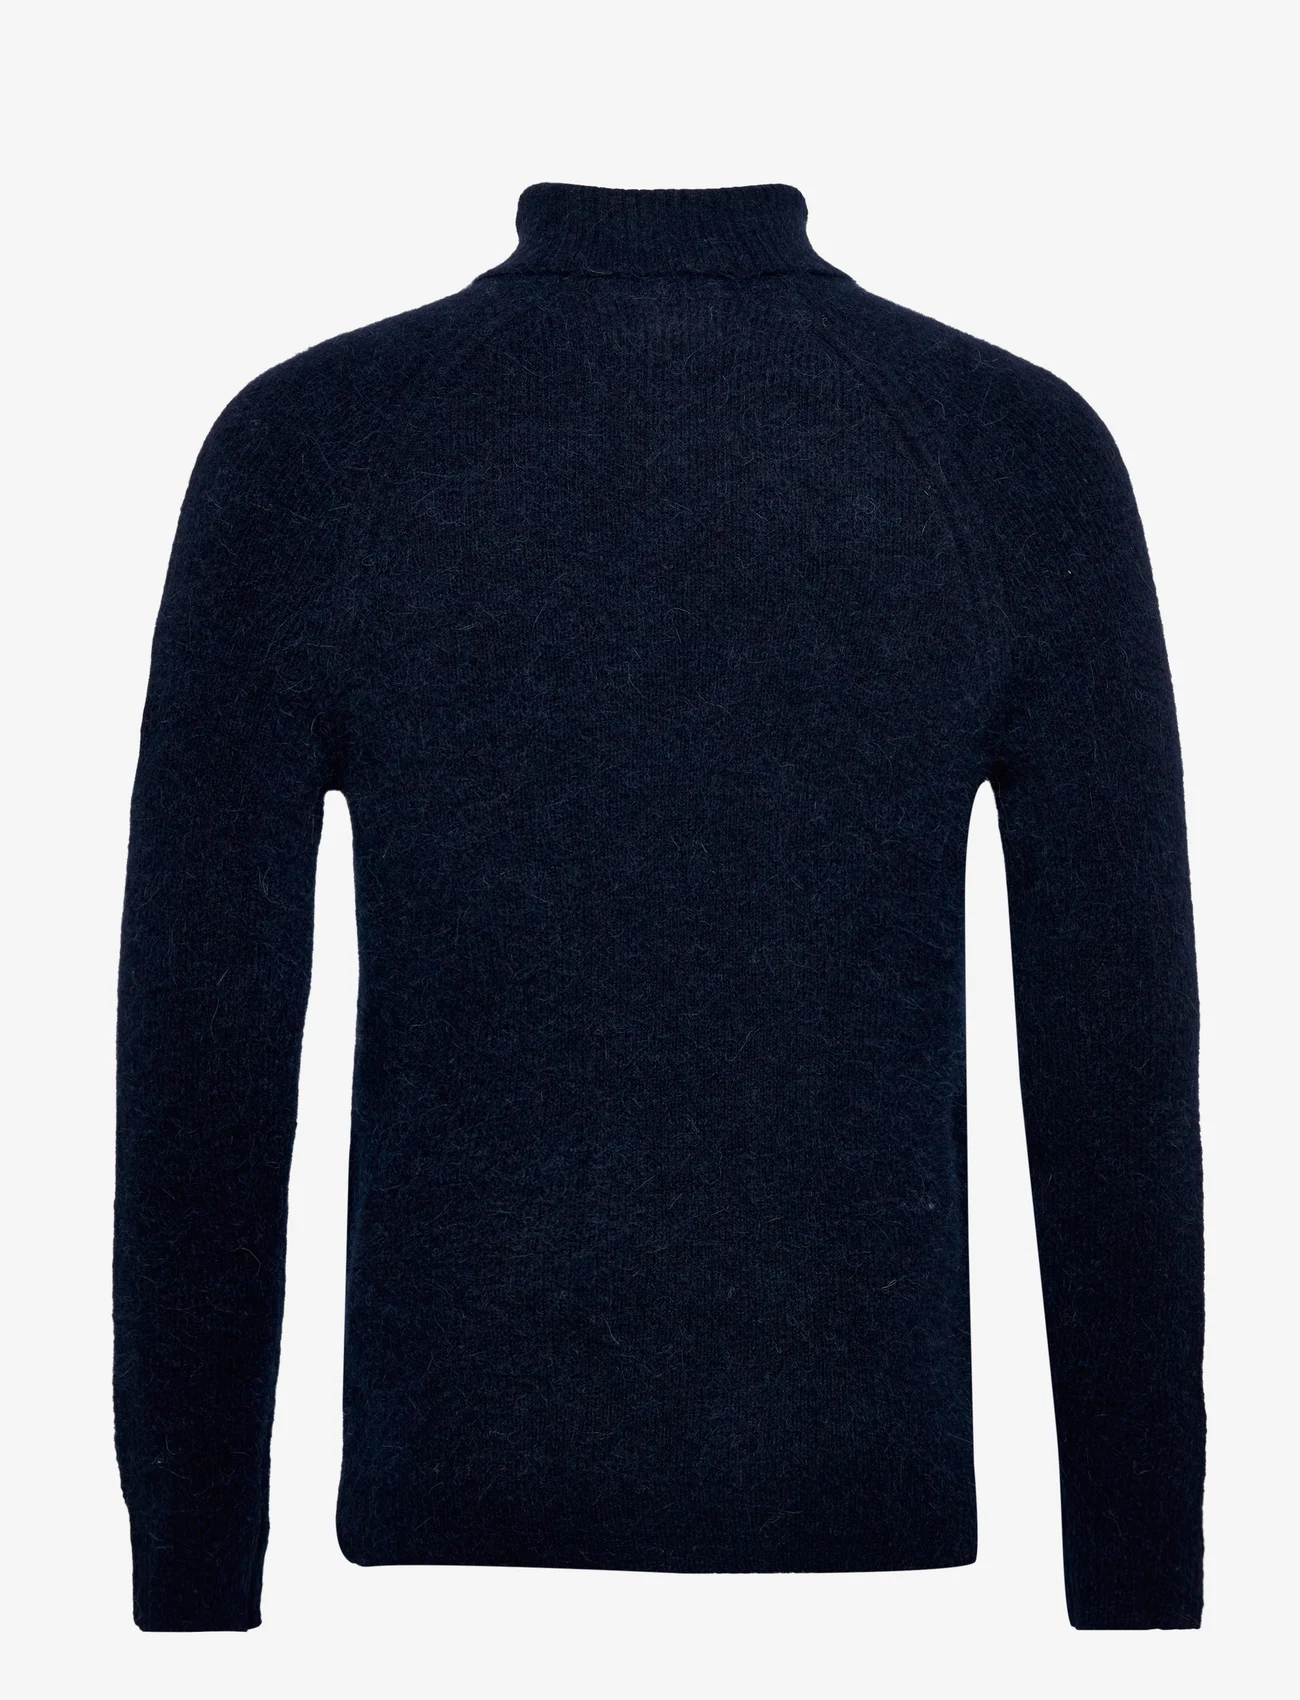 Superdry - STUDIOS CHUNKY ROLL NECK - perusneuleet - eclipse navy - 1